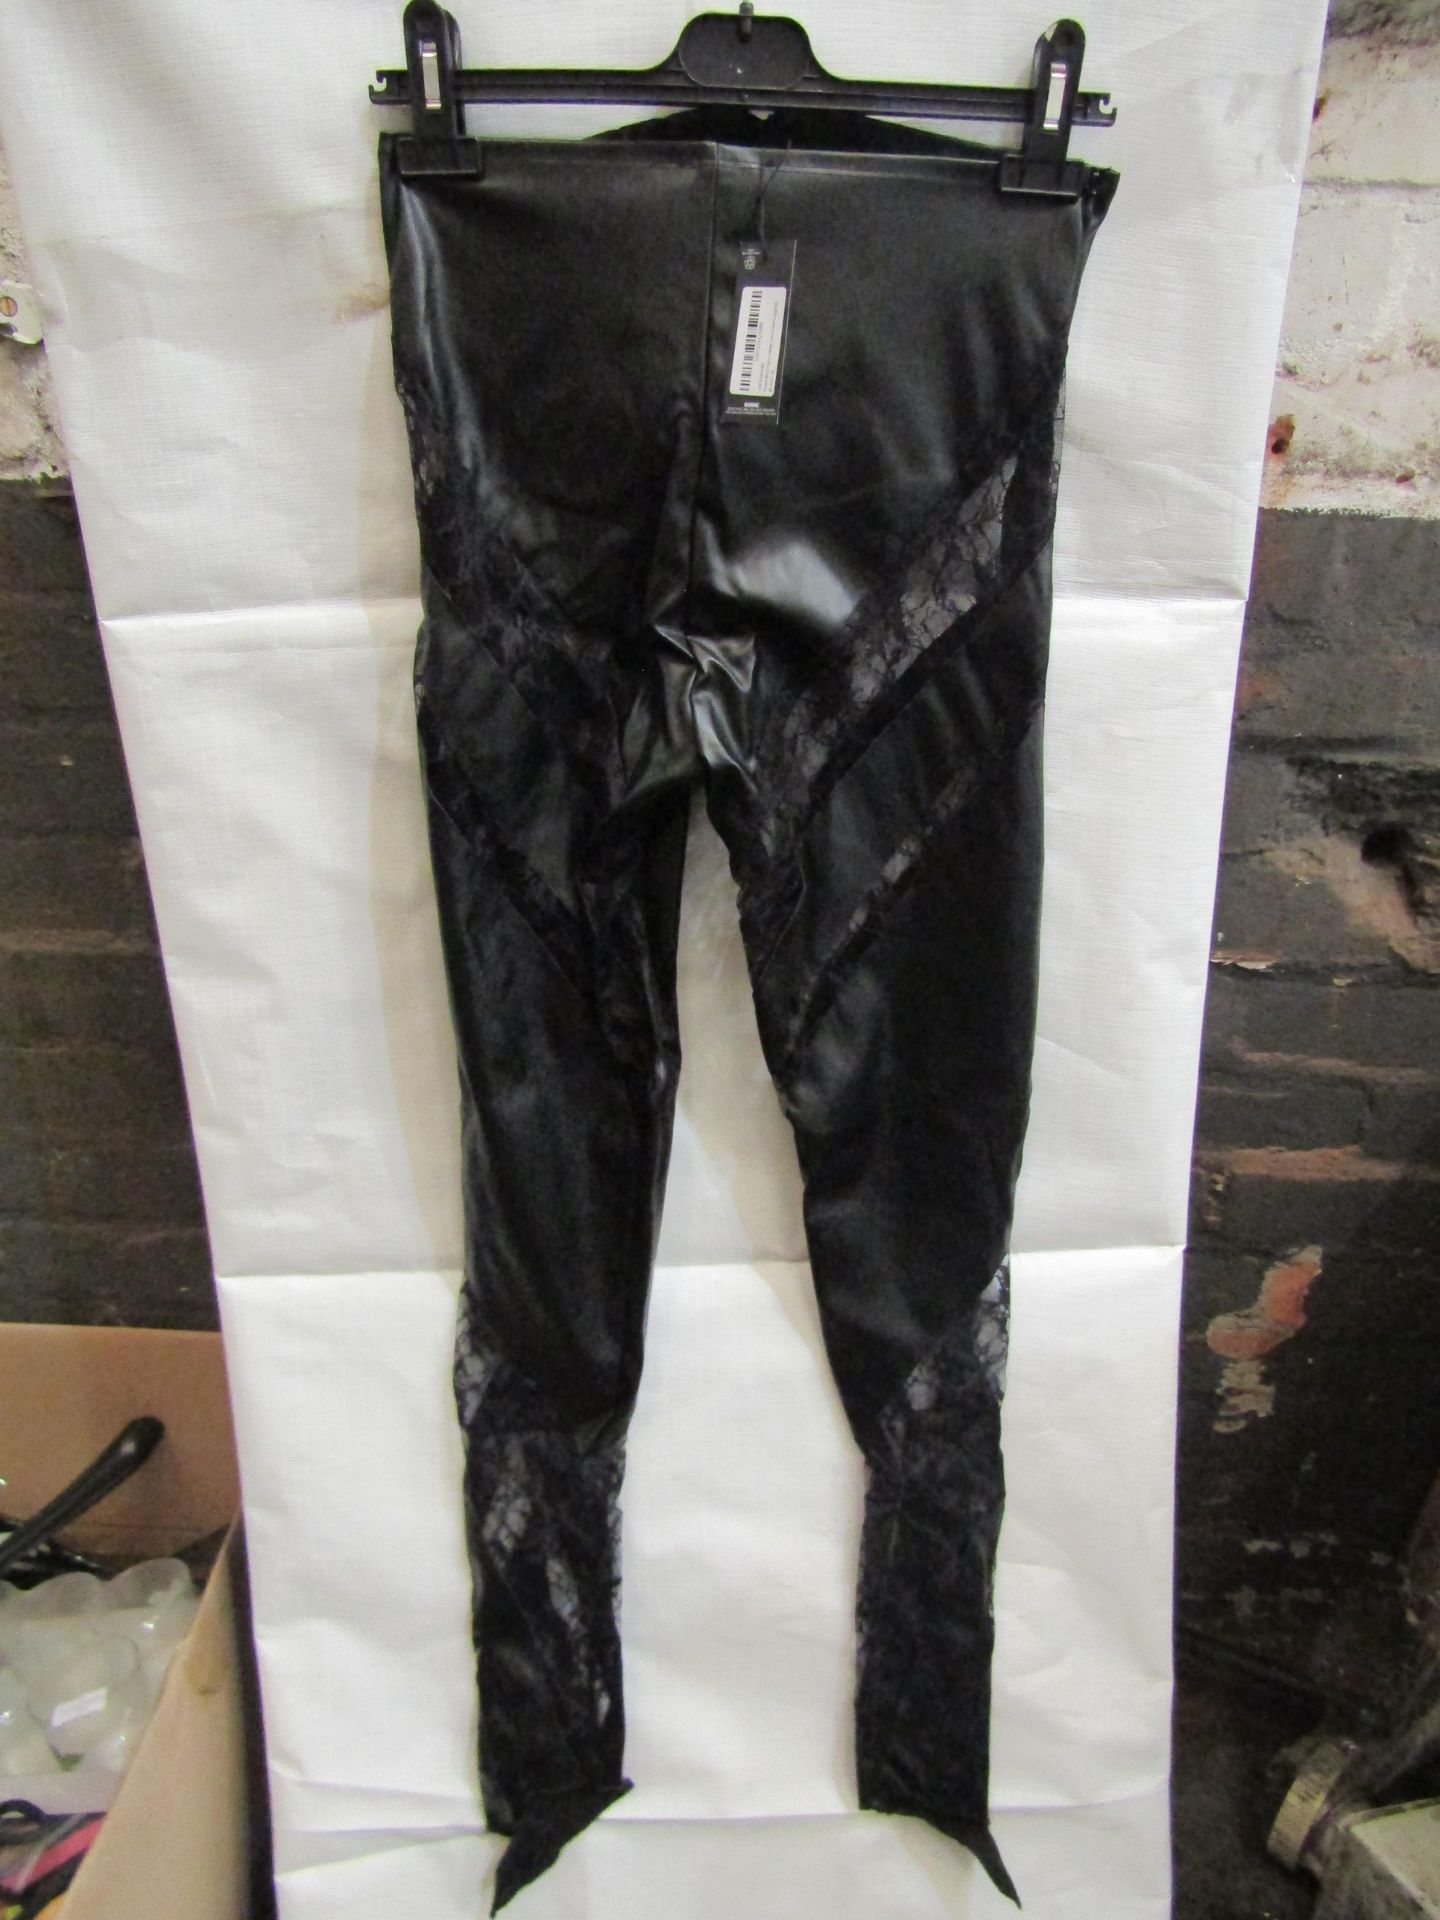 2x PrettyLittleThing Shape Black Faux Leather Insert Leggings, Size: 8 - New & Packaged.